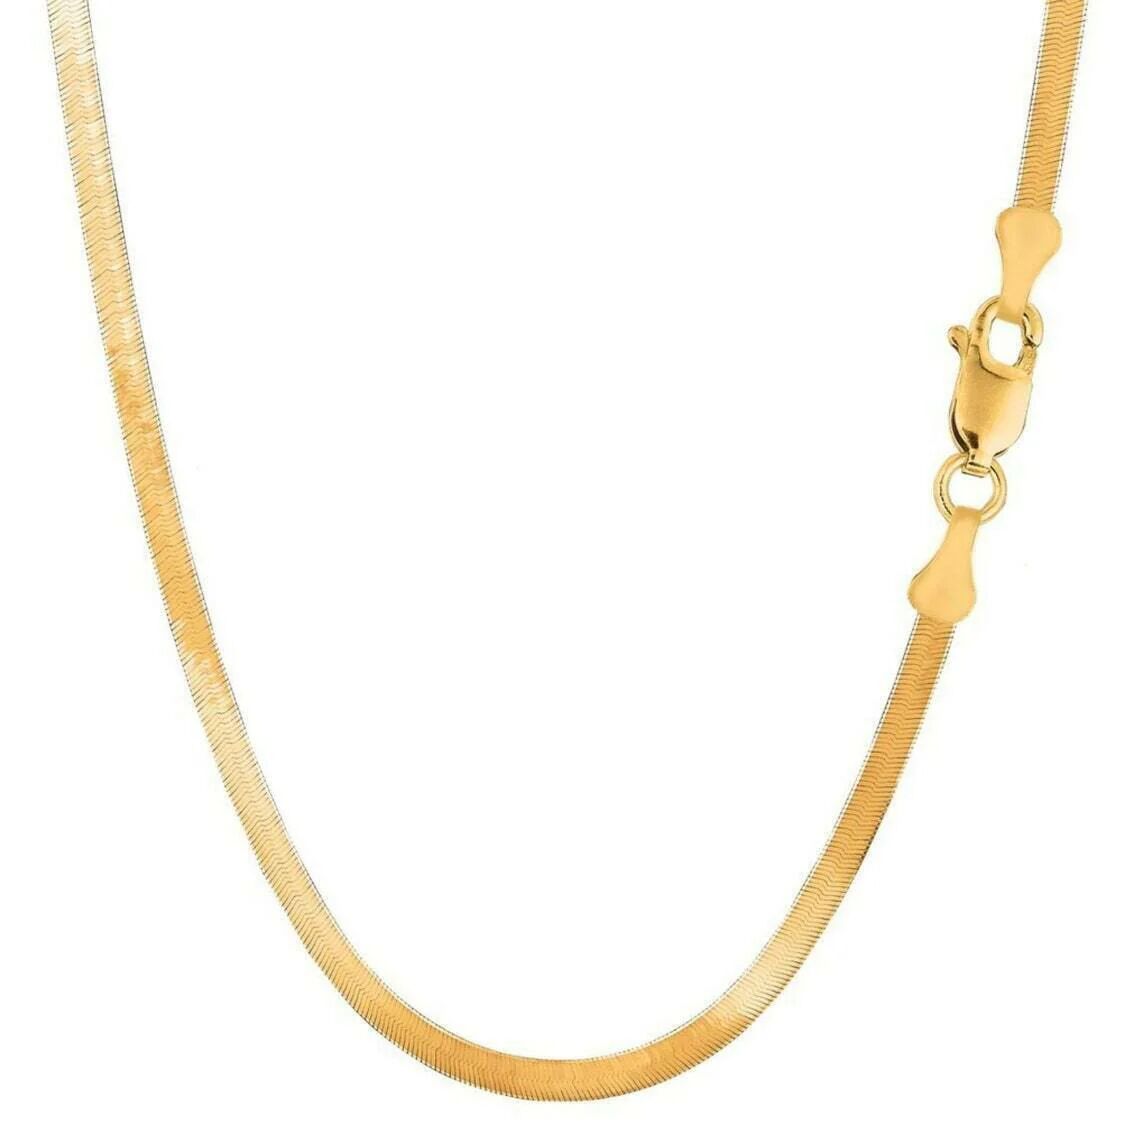 DailySale 14k Solid Yellow Gold High Polish Herringbone Necklace Chain 3mm